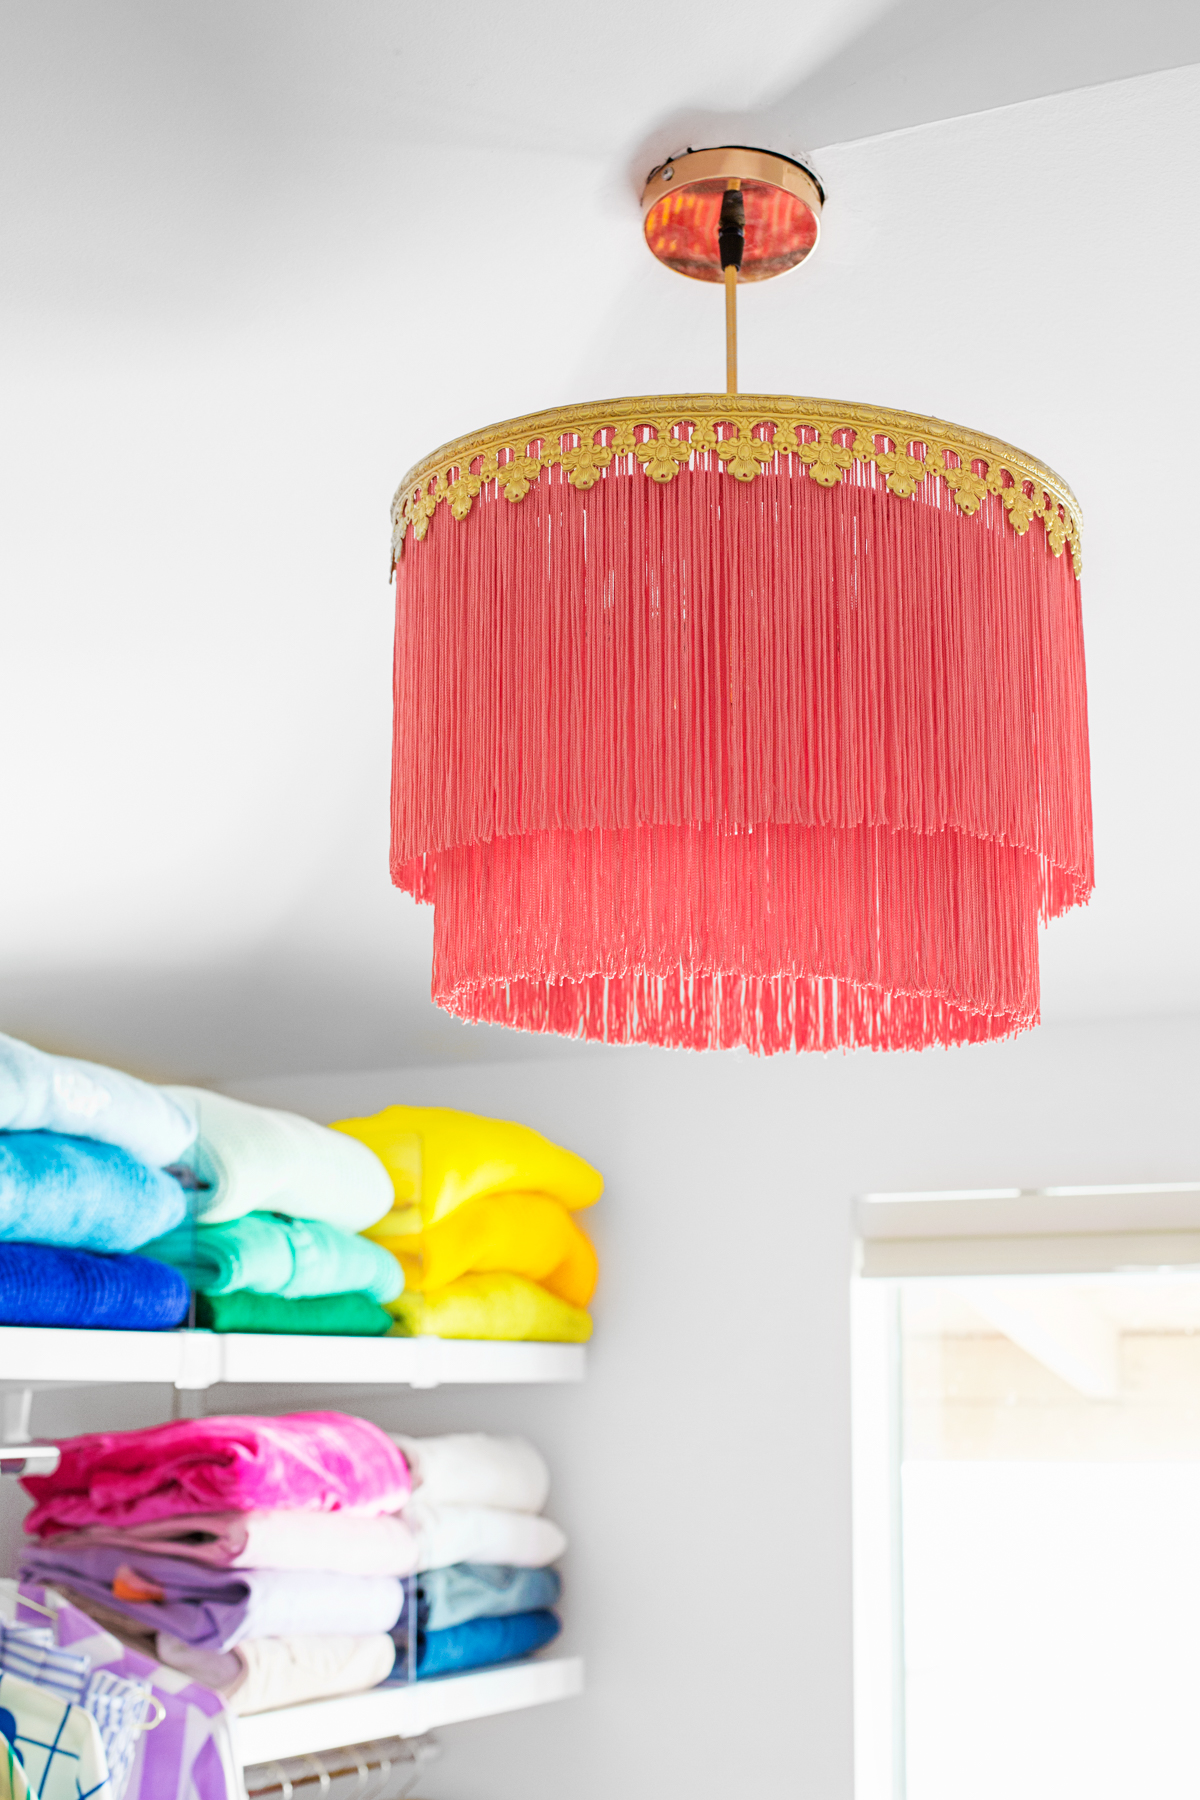 How To Make A Fringe Chandelier, How To Add Fringe A Lampshade